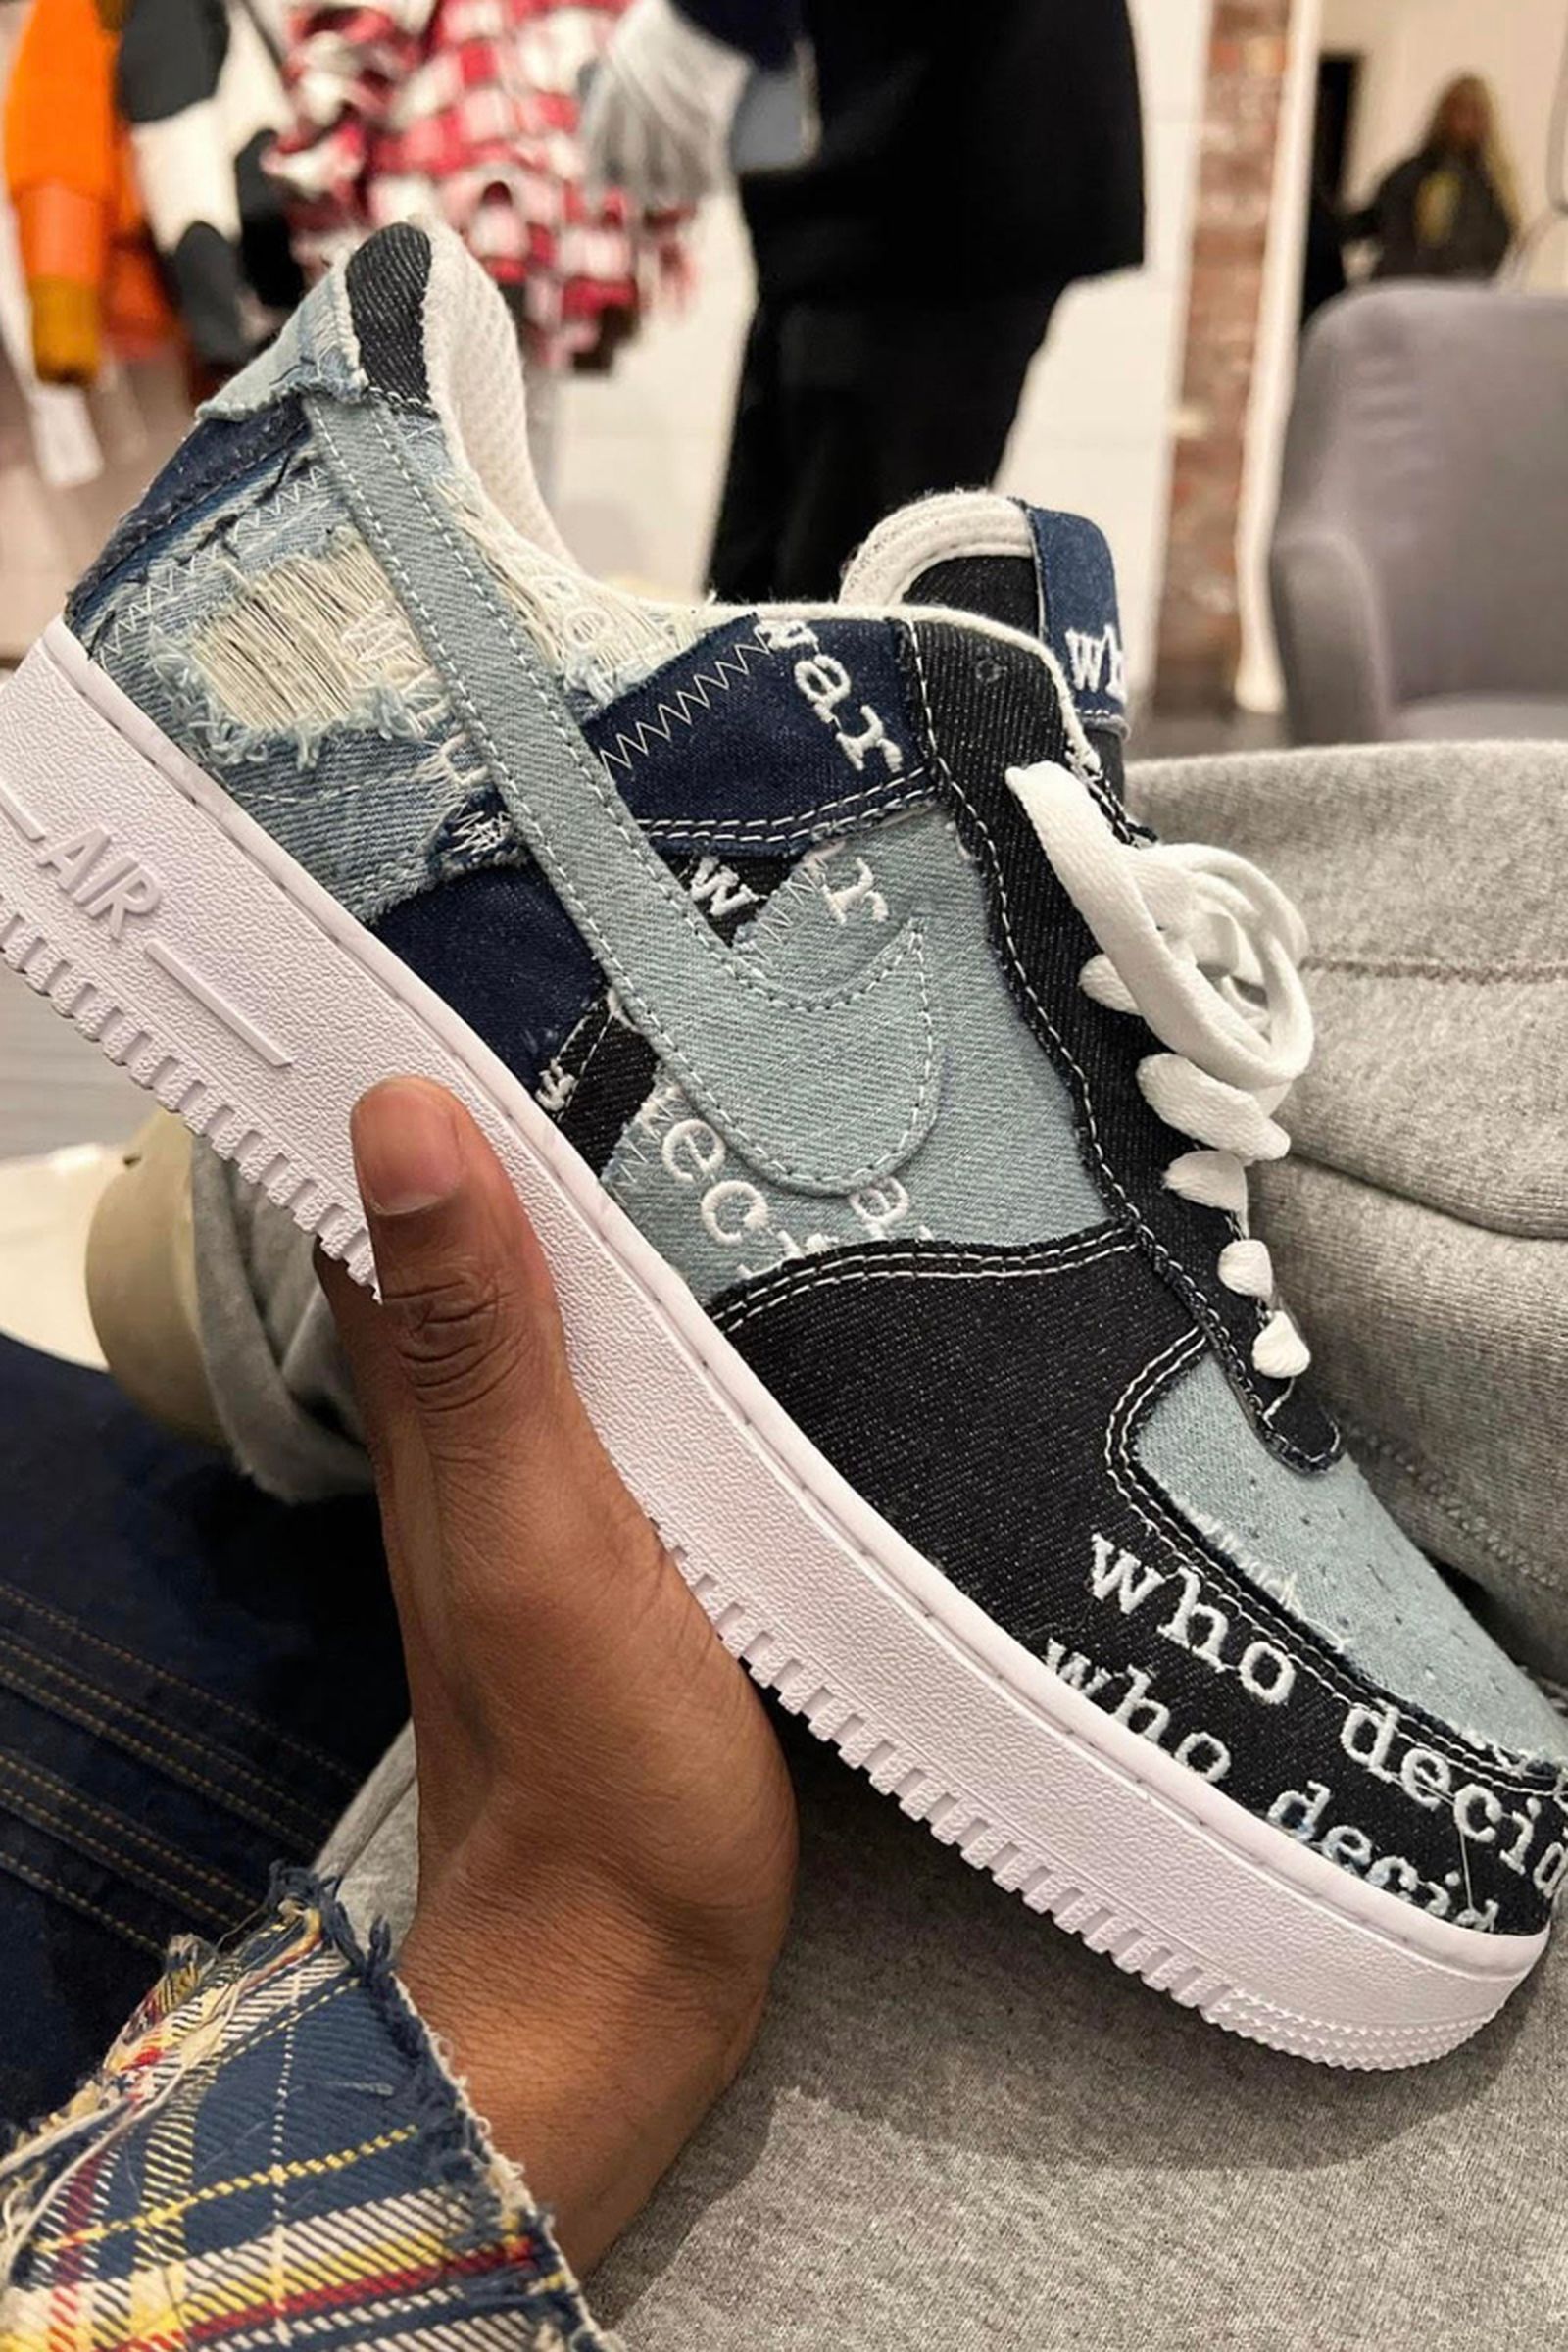 Decides War x Nike Air Force 1 Collab Release Date, Price